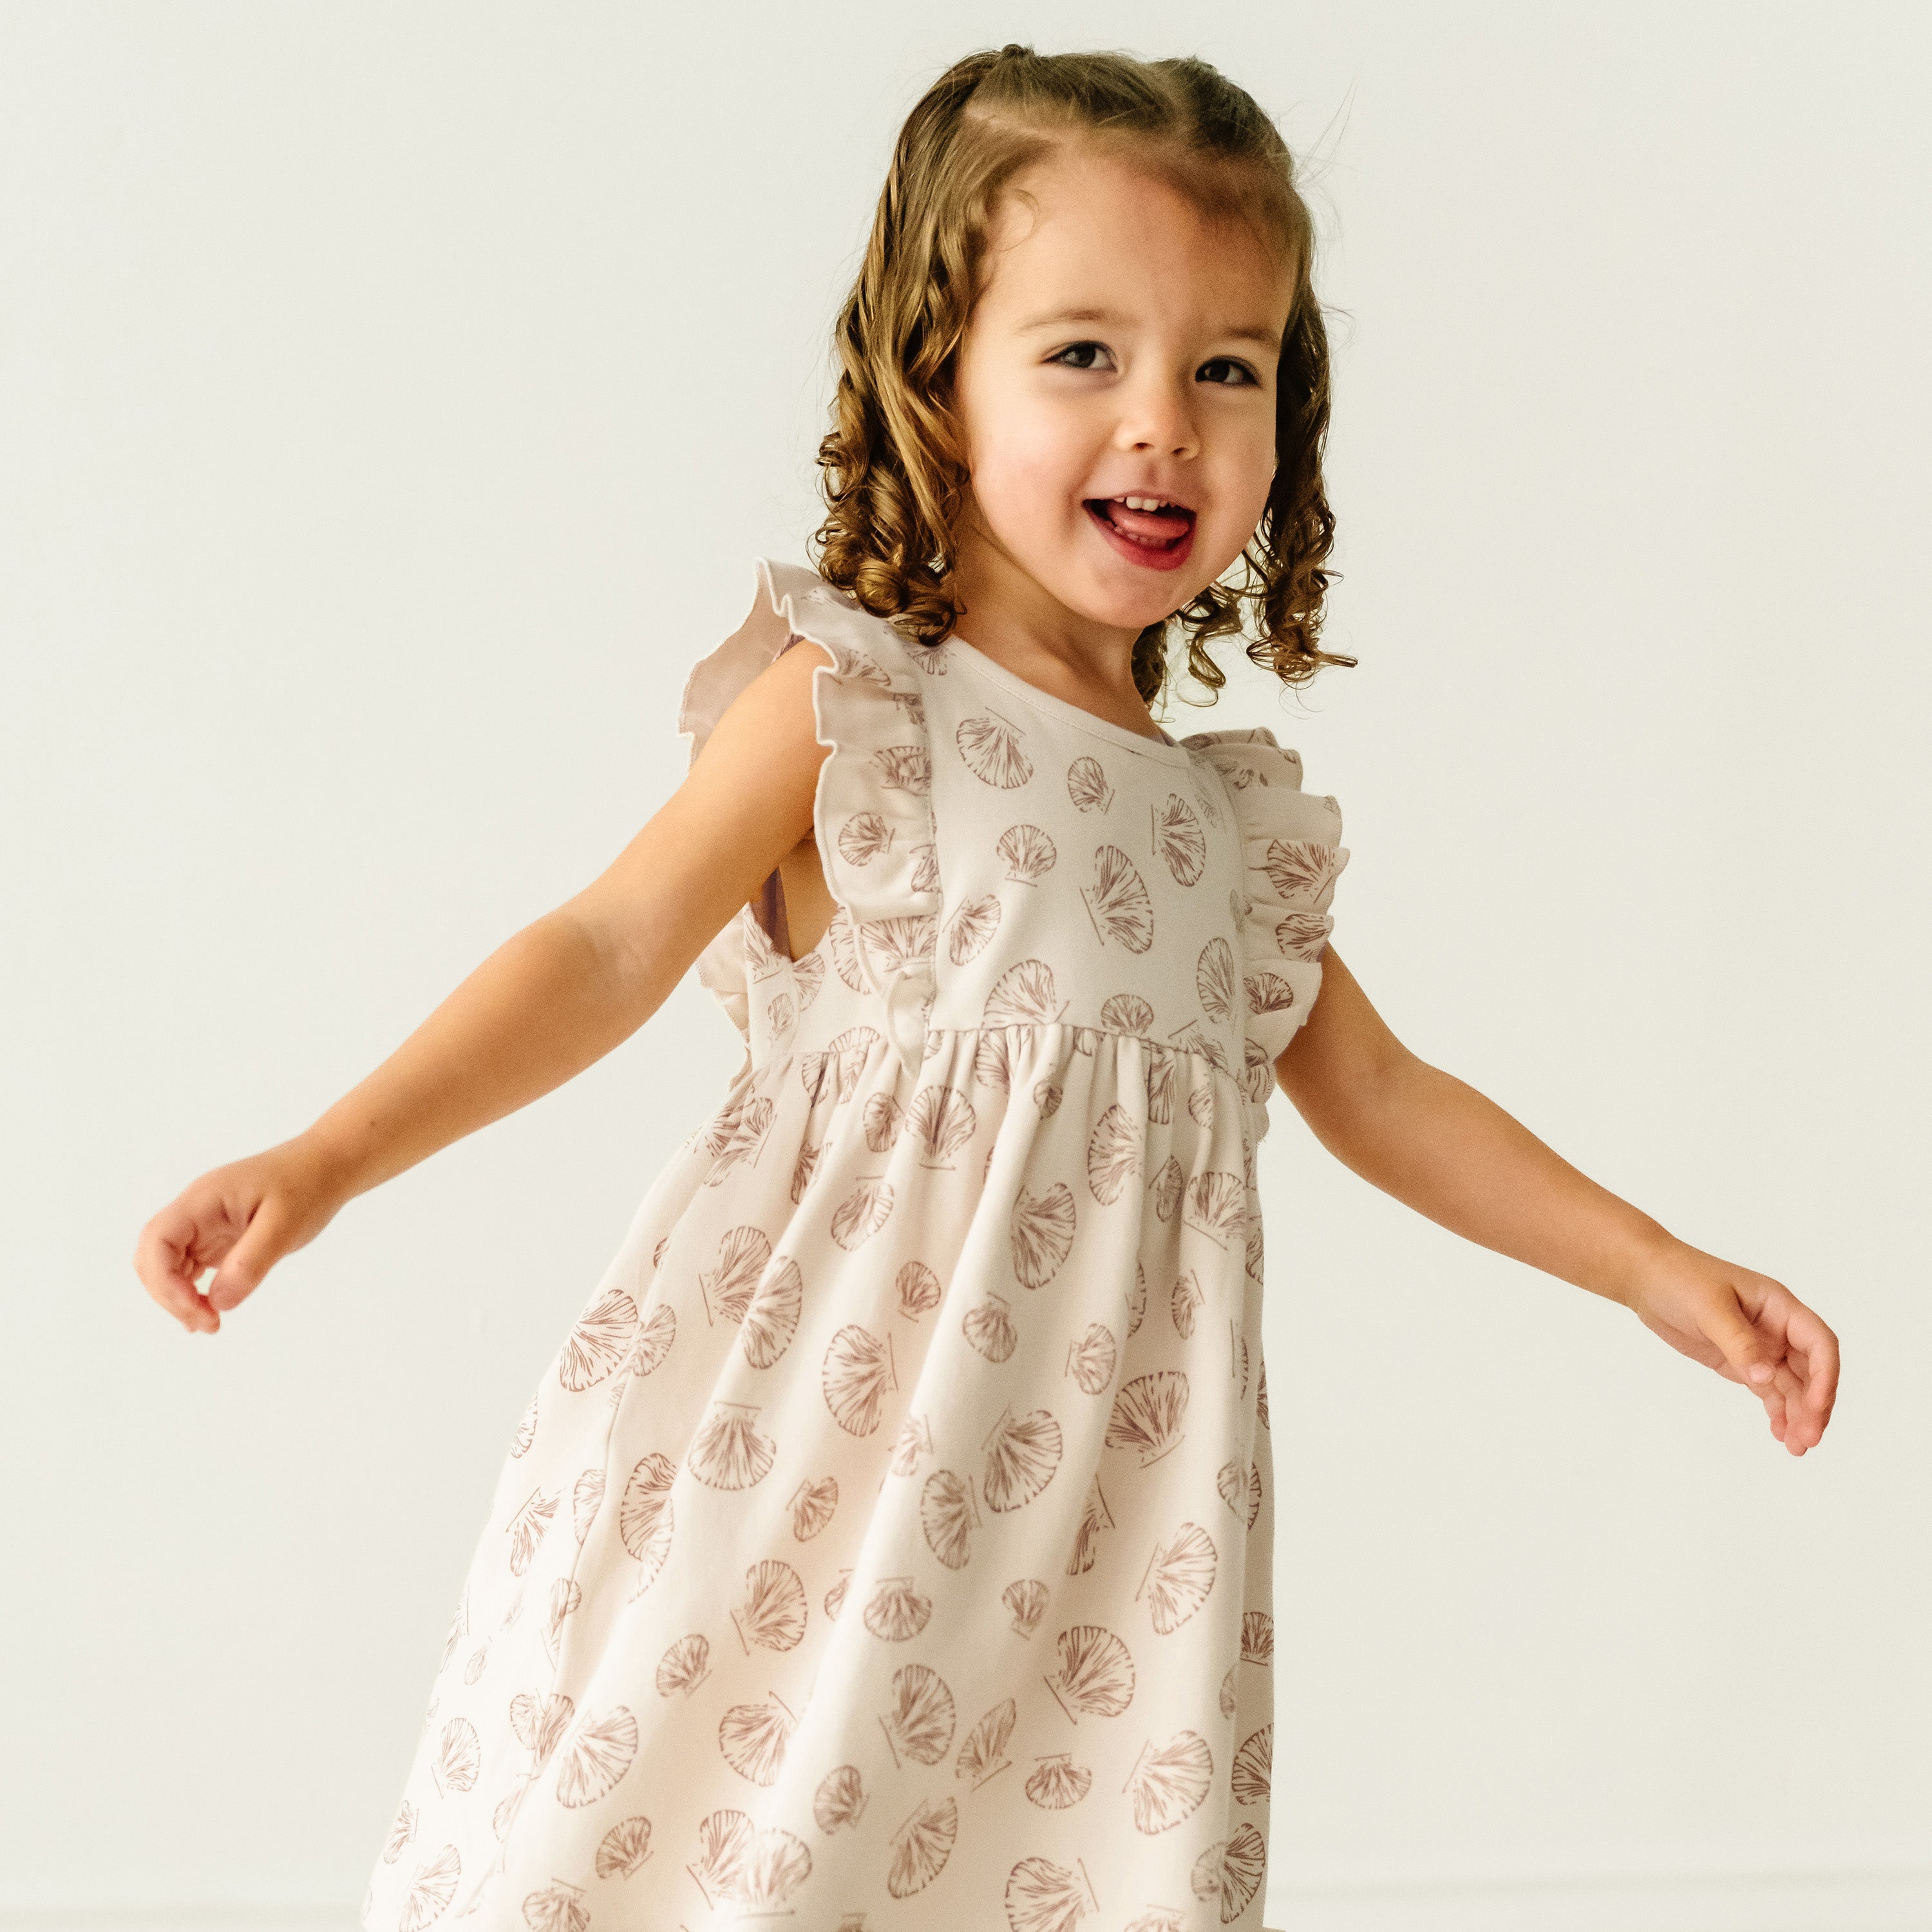 A joyful baby girl with curly hair, wearing a Makemake Organics Organic Flutter Dress - Seashells, smiles and stretches her arms out while standing against a plain light background.